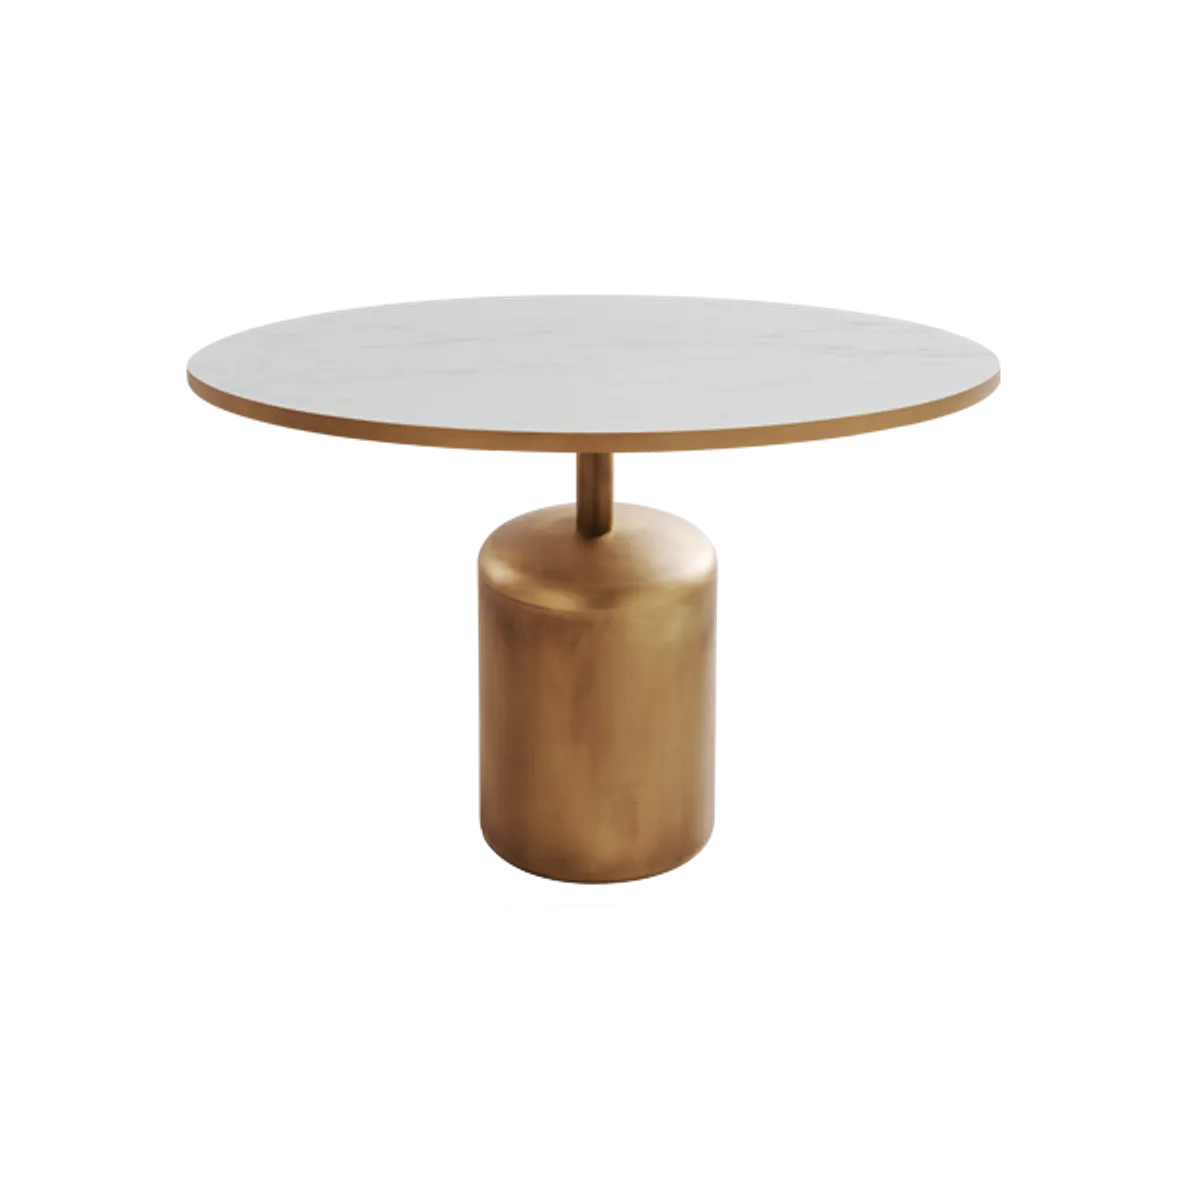 Brunella table_InsideOutContracts